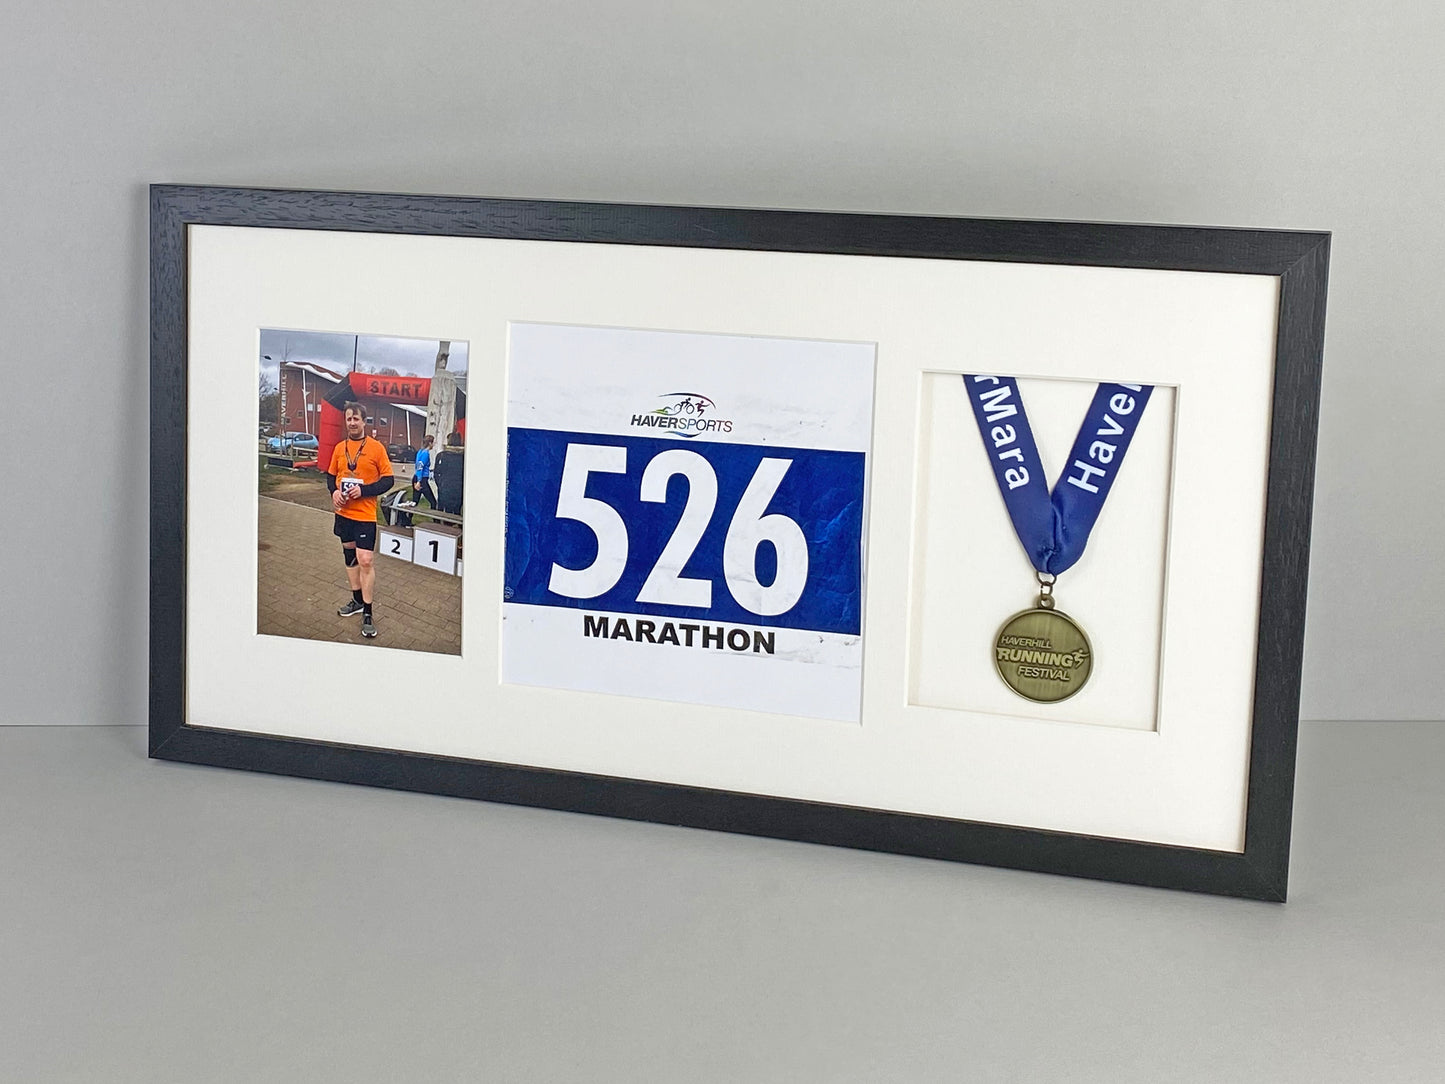 Medal display Frame with Apertures for Medal, Bib number and Photo.